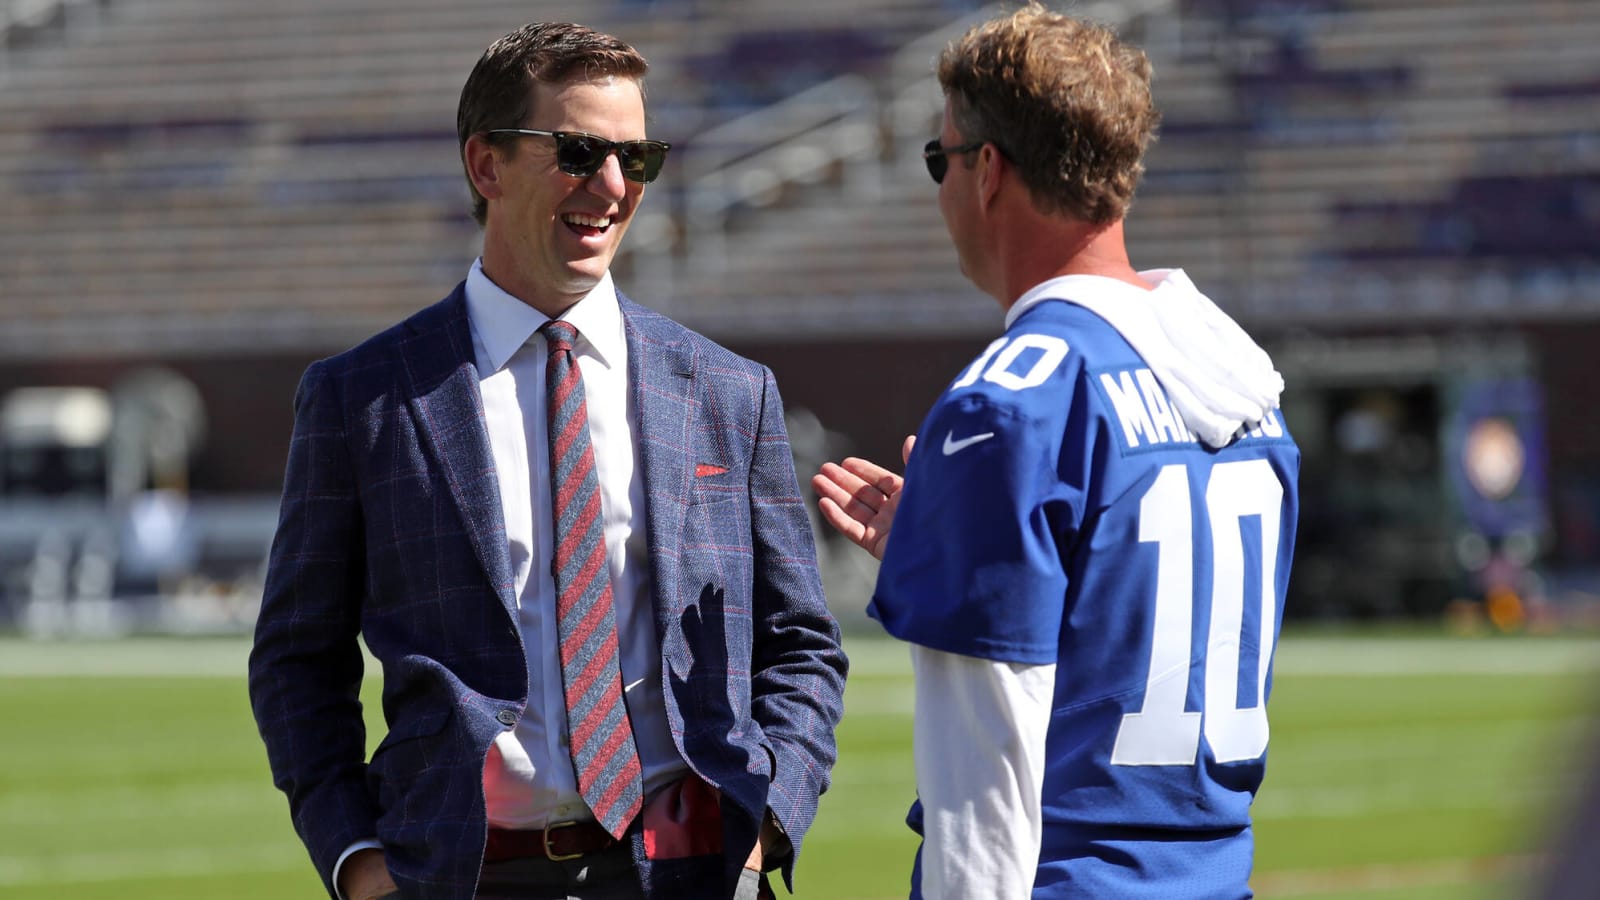 Philly gives Eli Manning 'double-bird' welcome ahead of playoff game